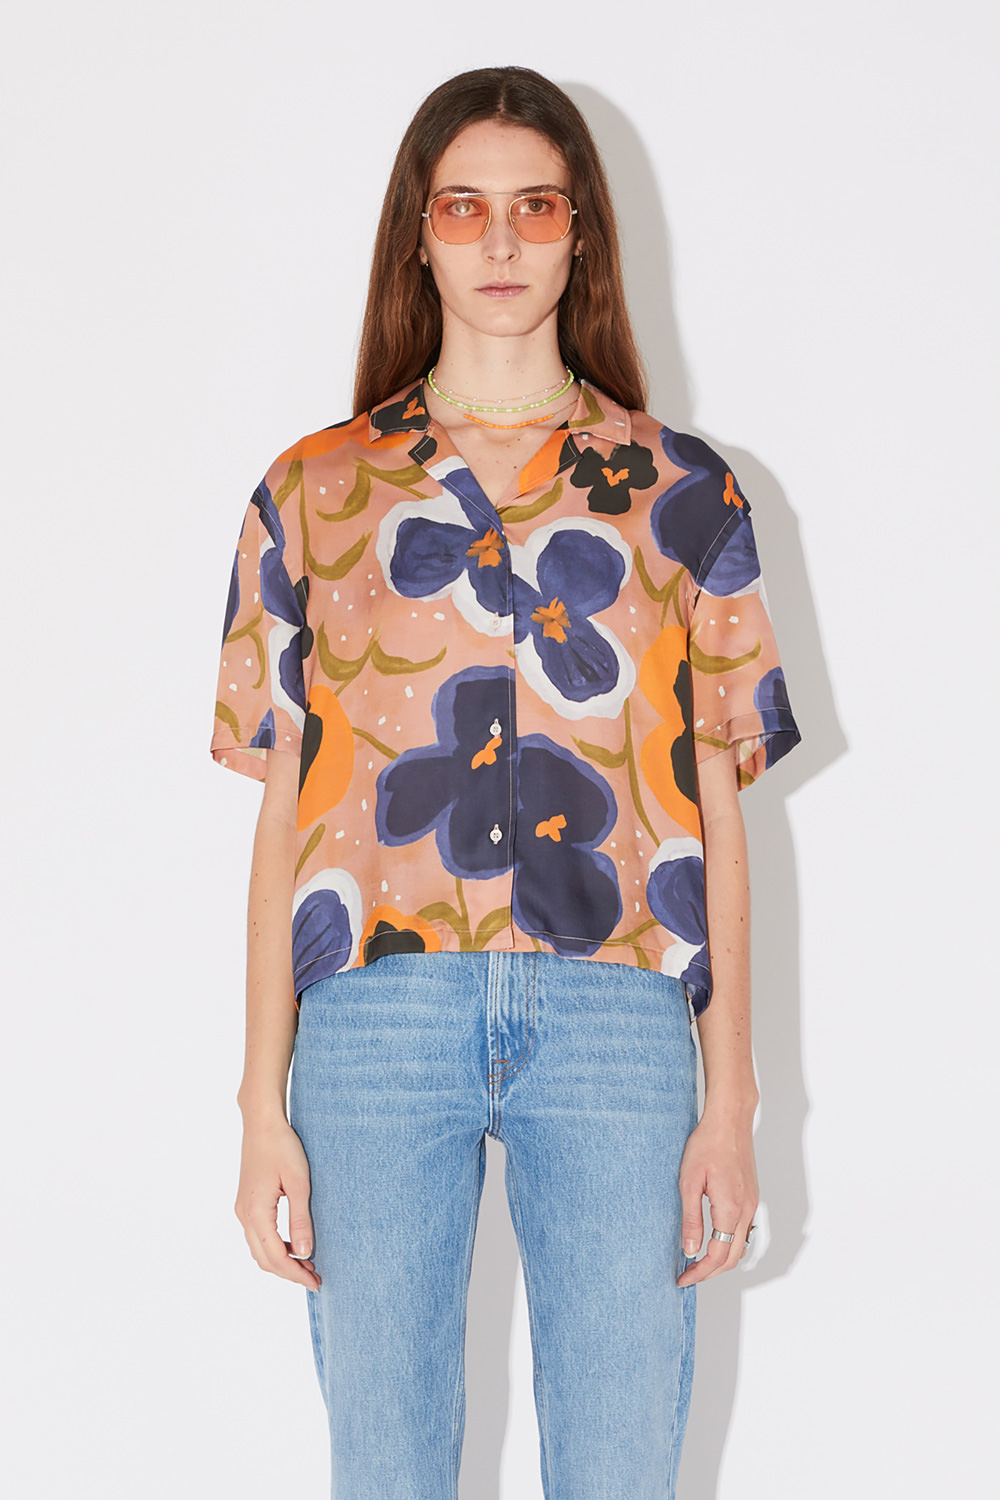 AMISH: PAINTED FLOWER BOWLING SHIRT